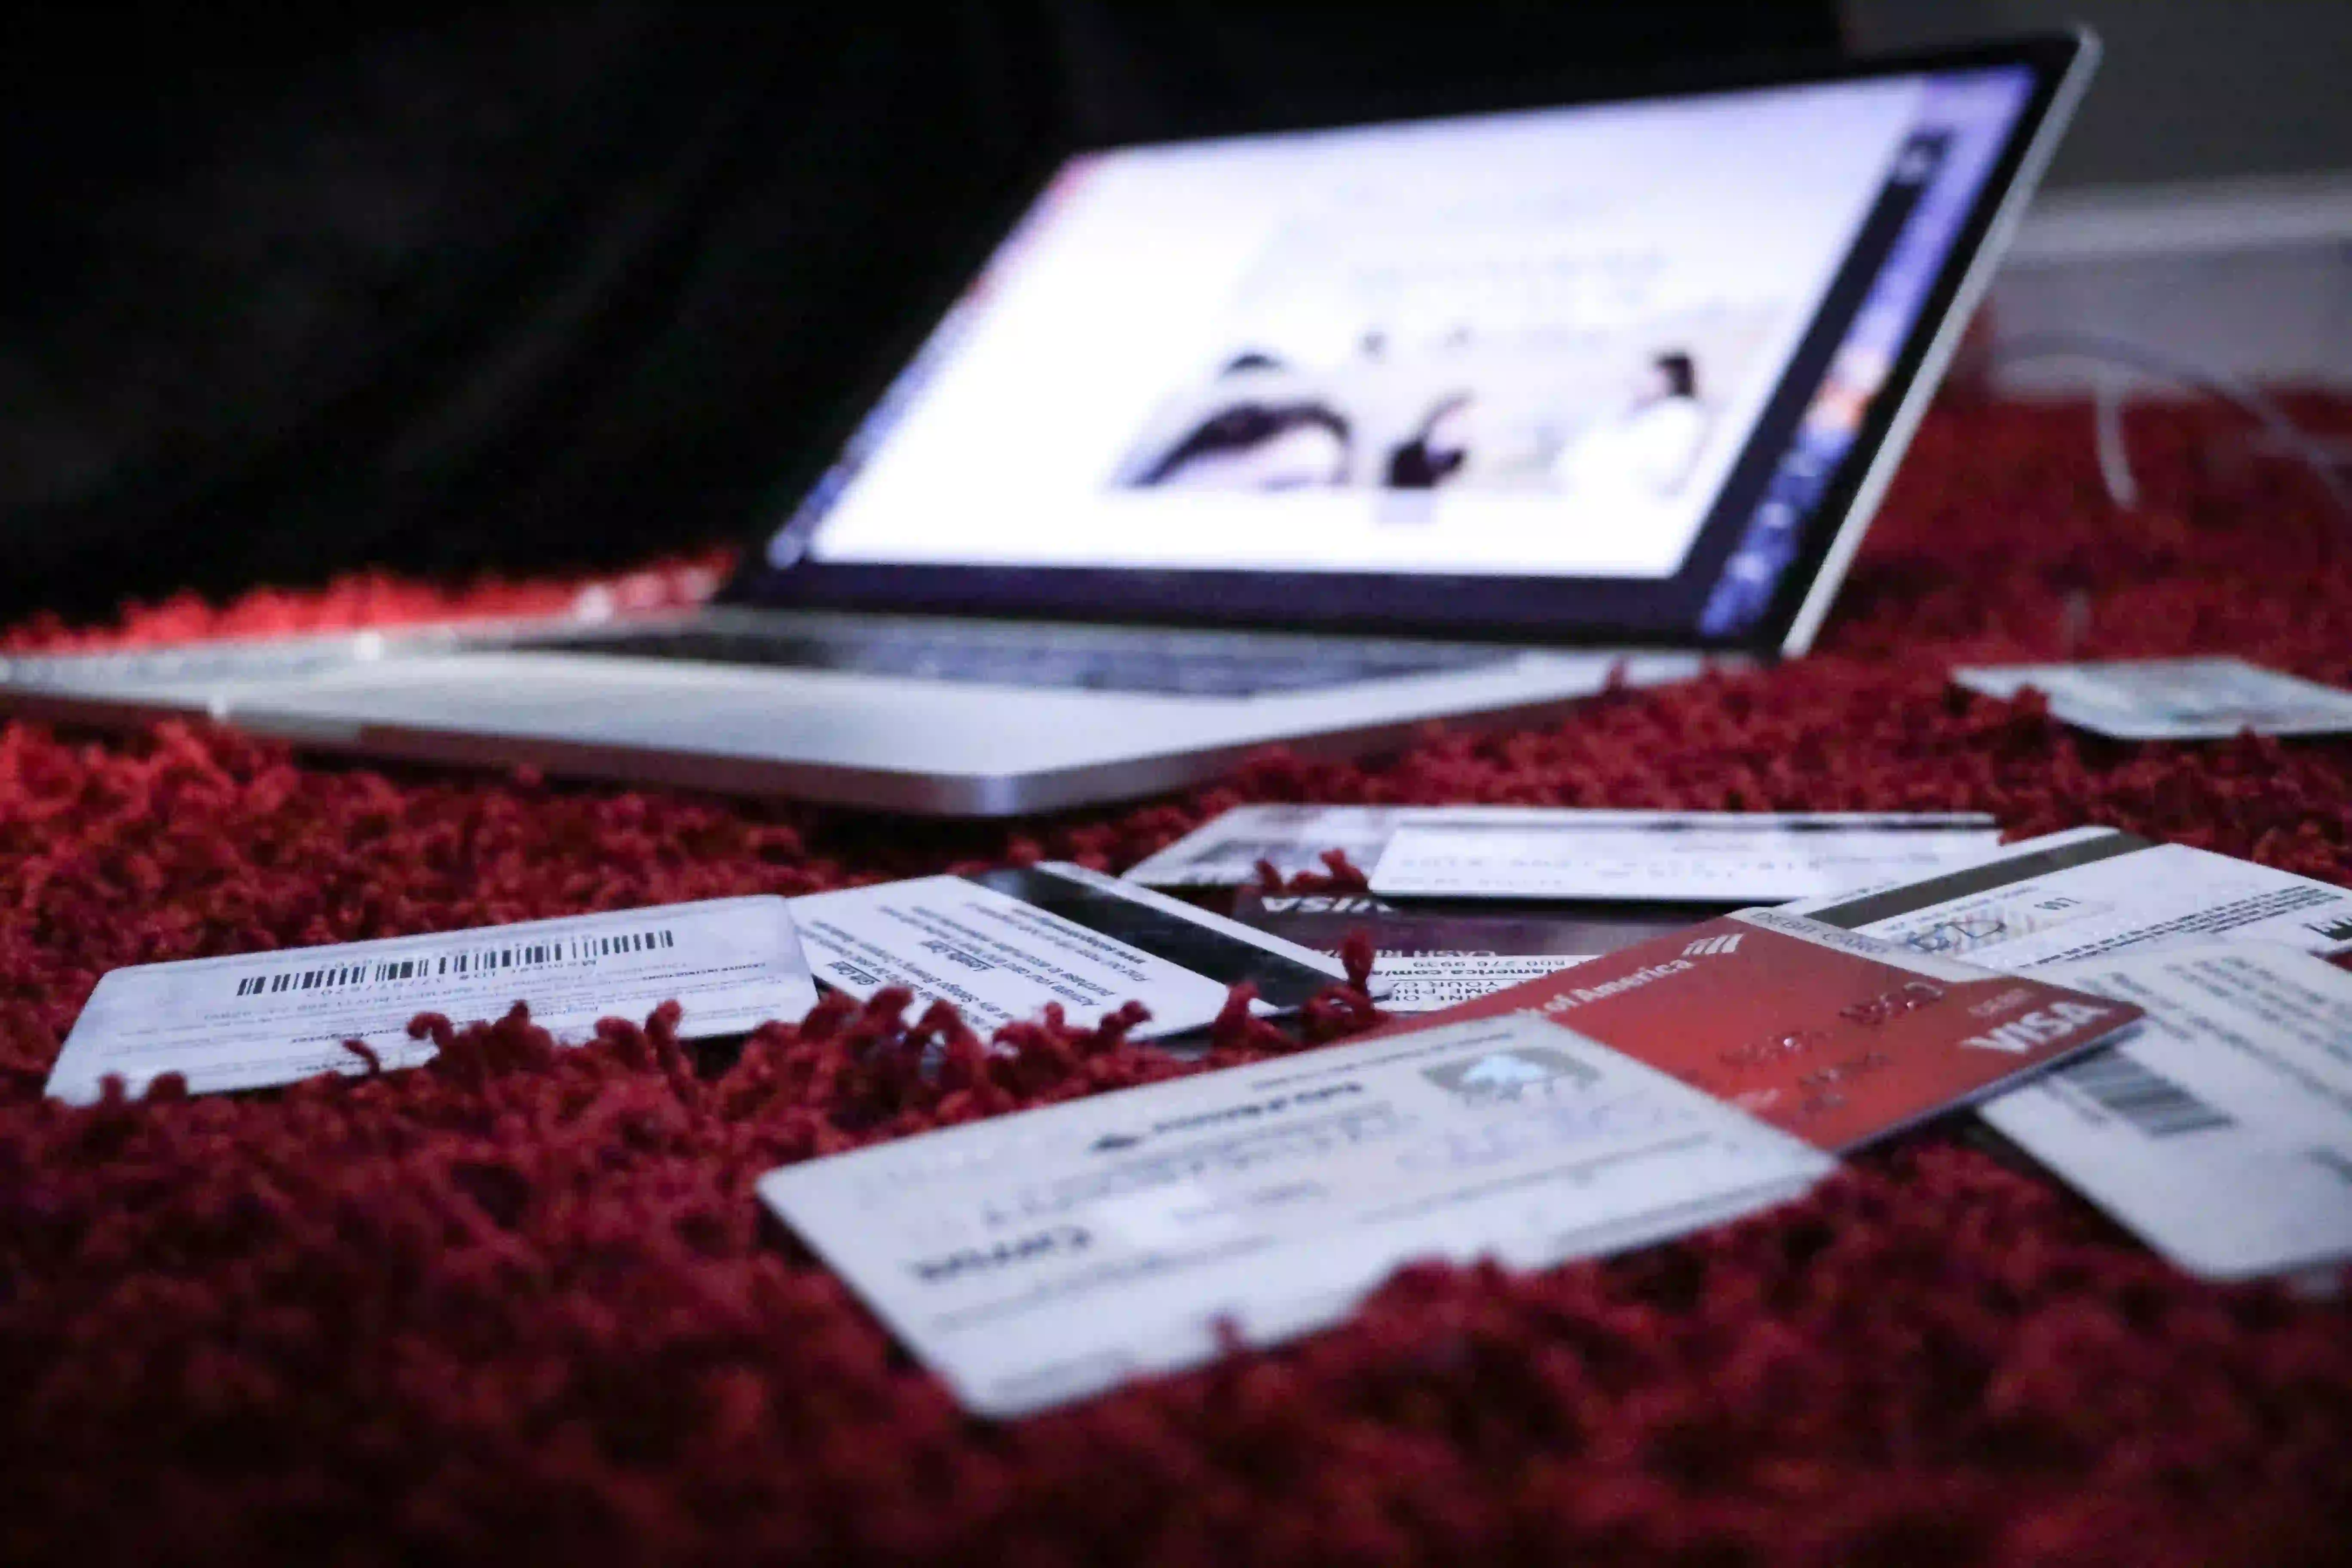 multiple credit cards scattered on a red carpet near a powered on laptop